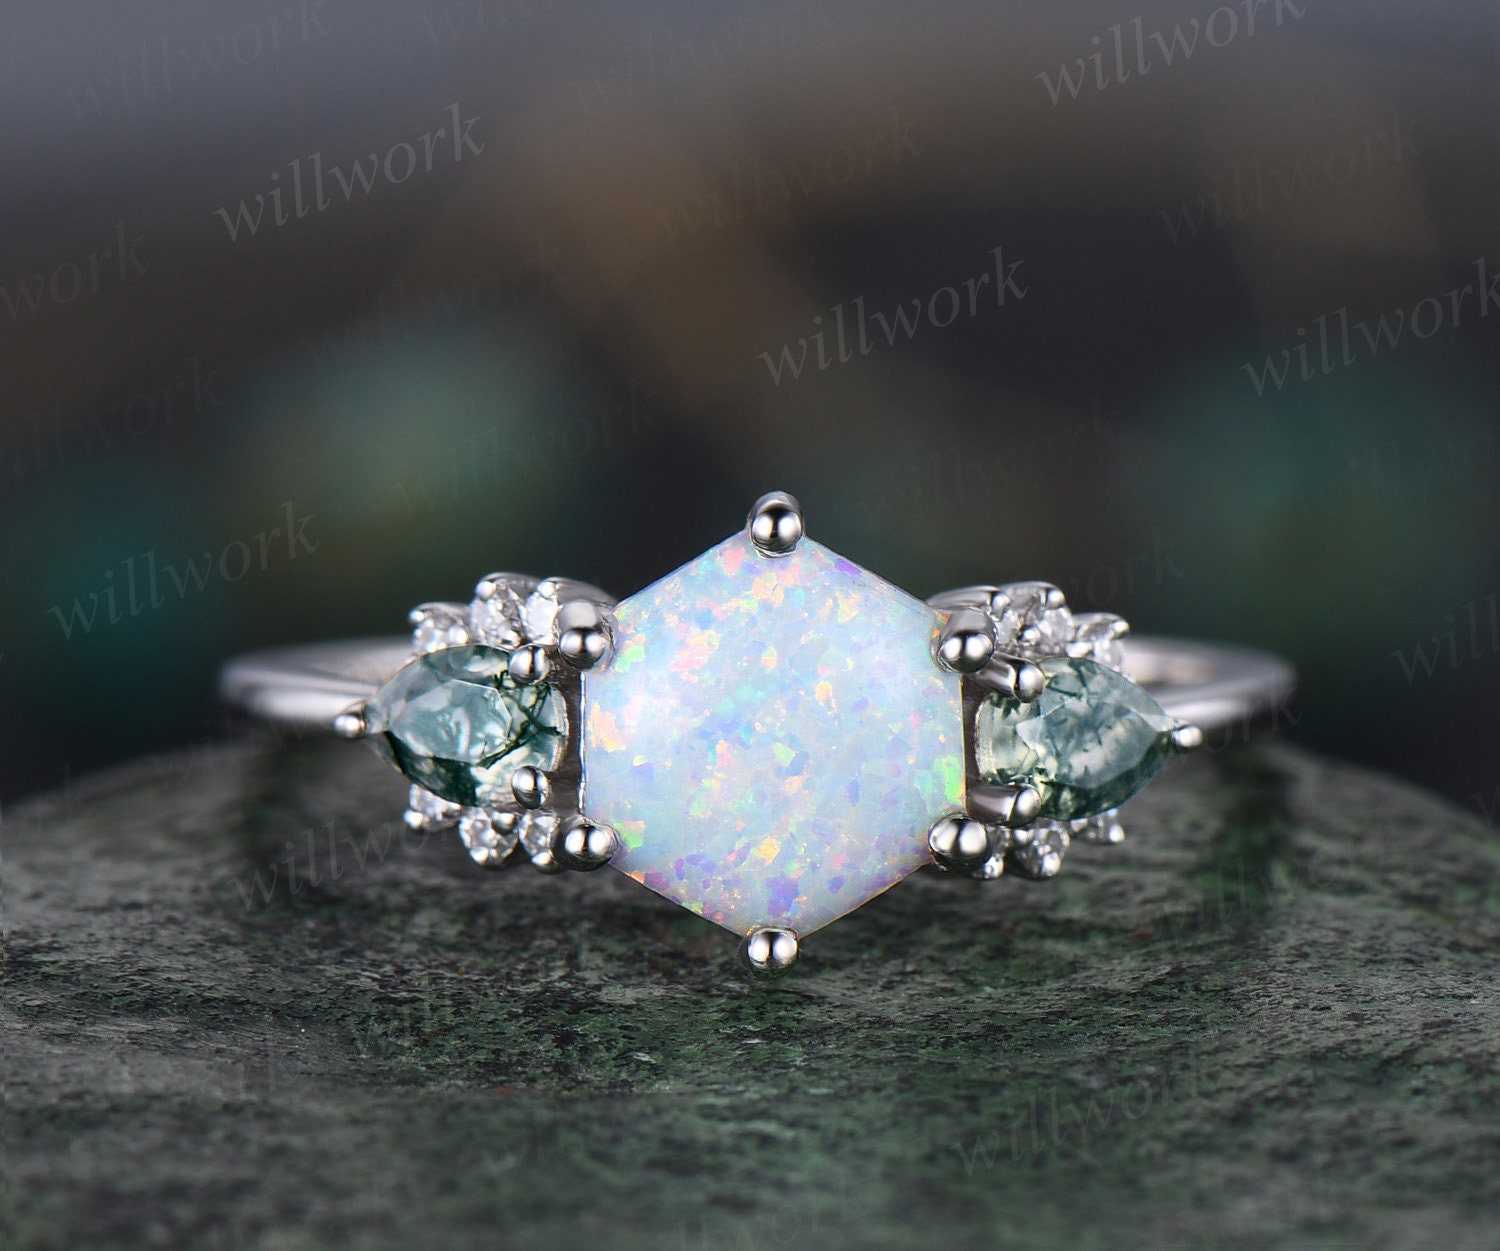 Artico's Silver White Opal Oval Shaped Ring